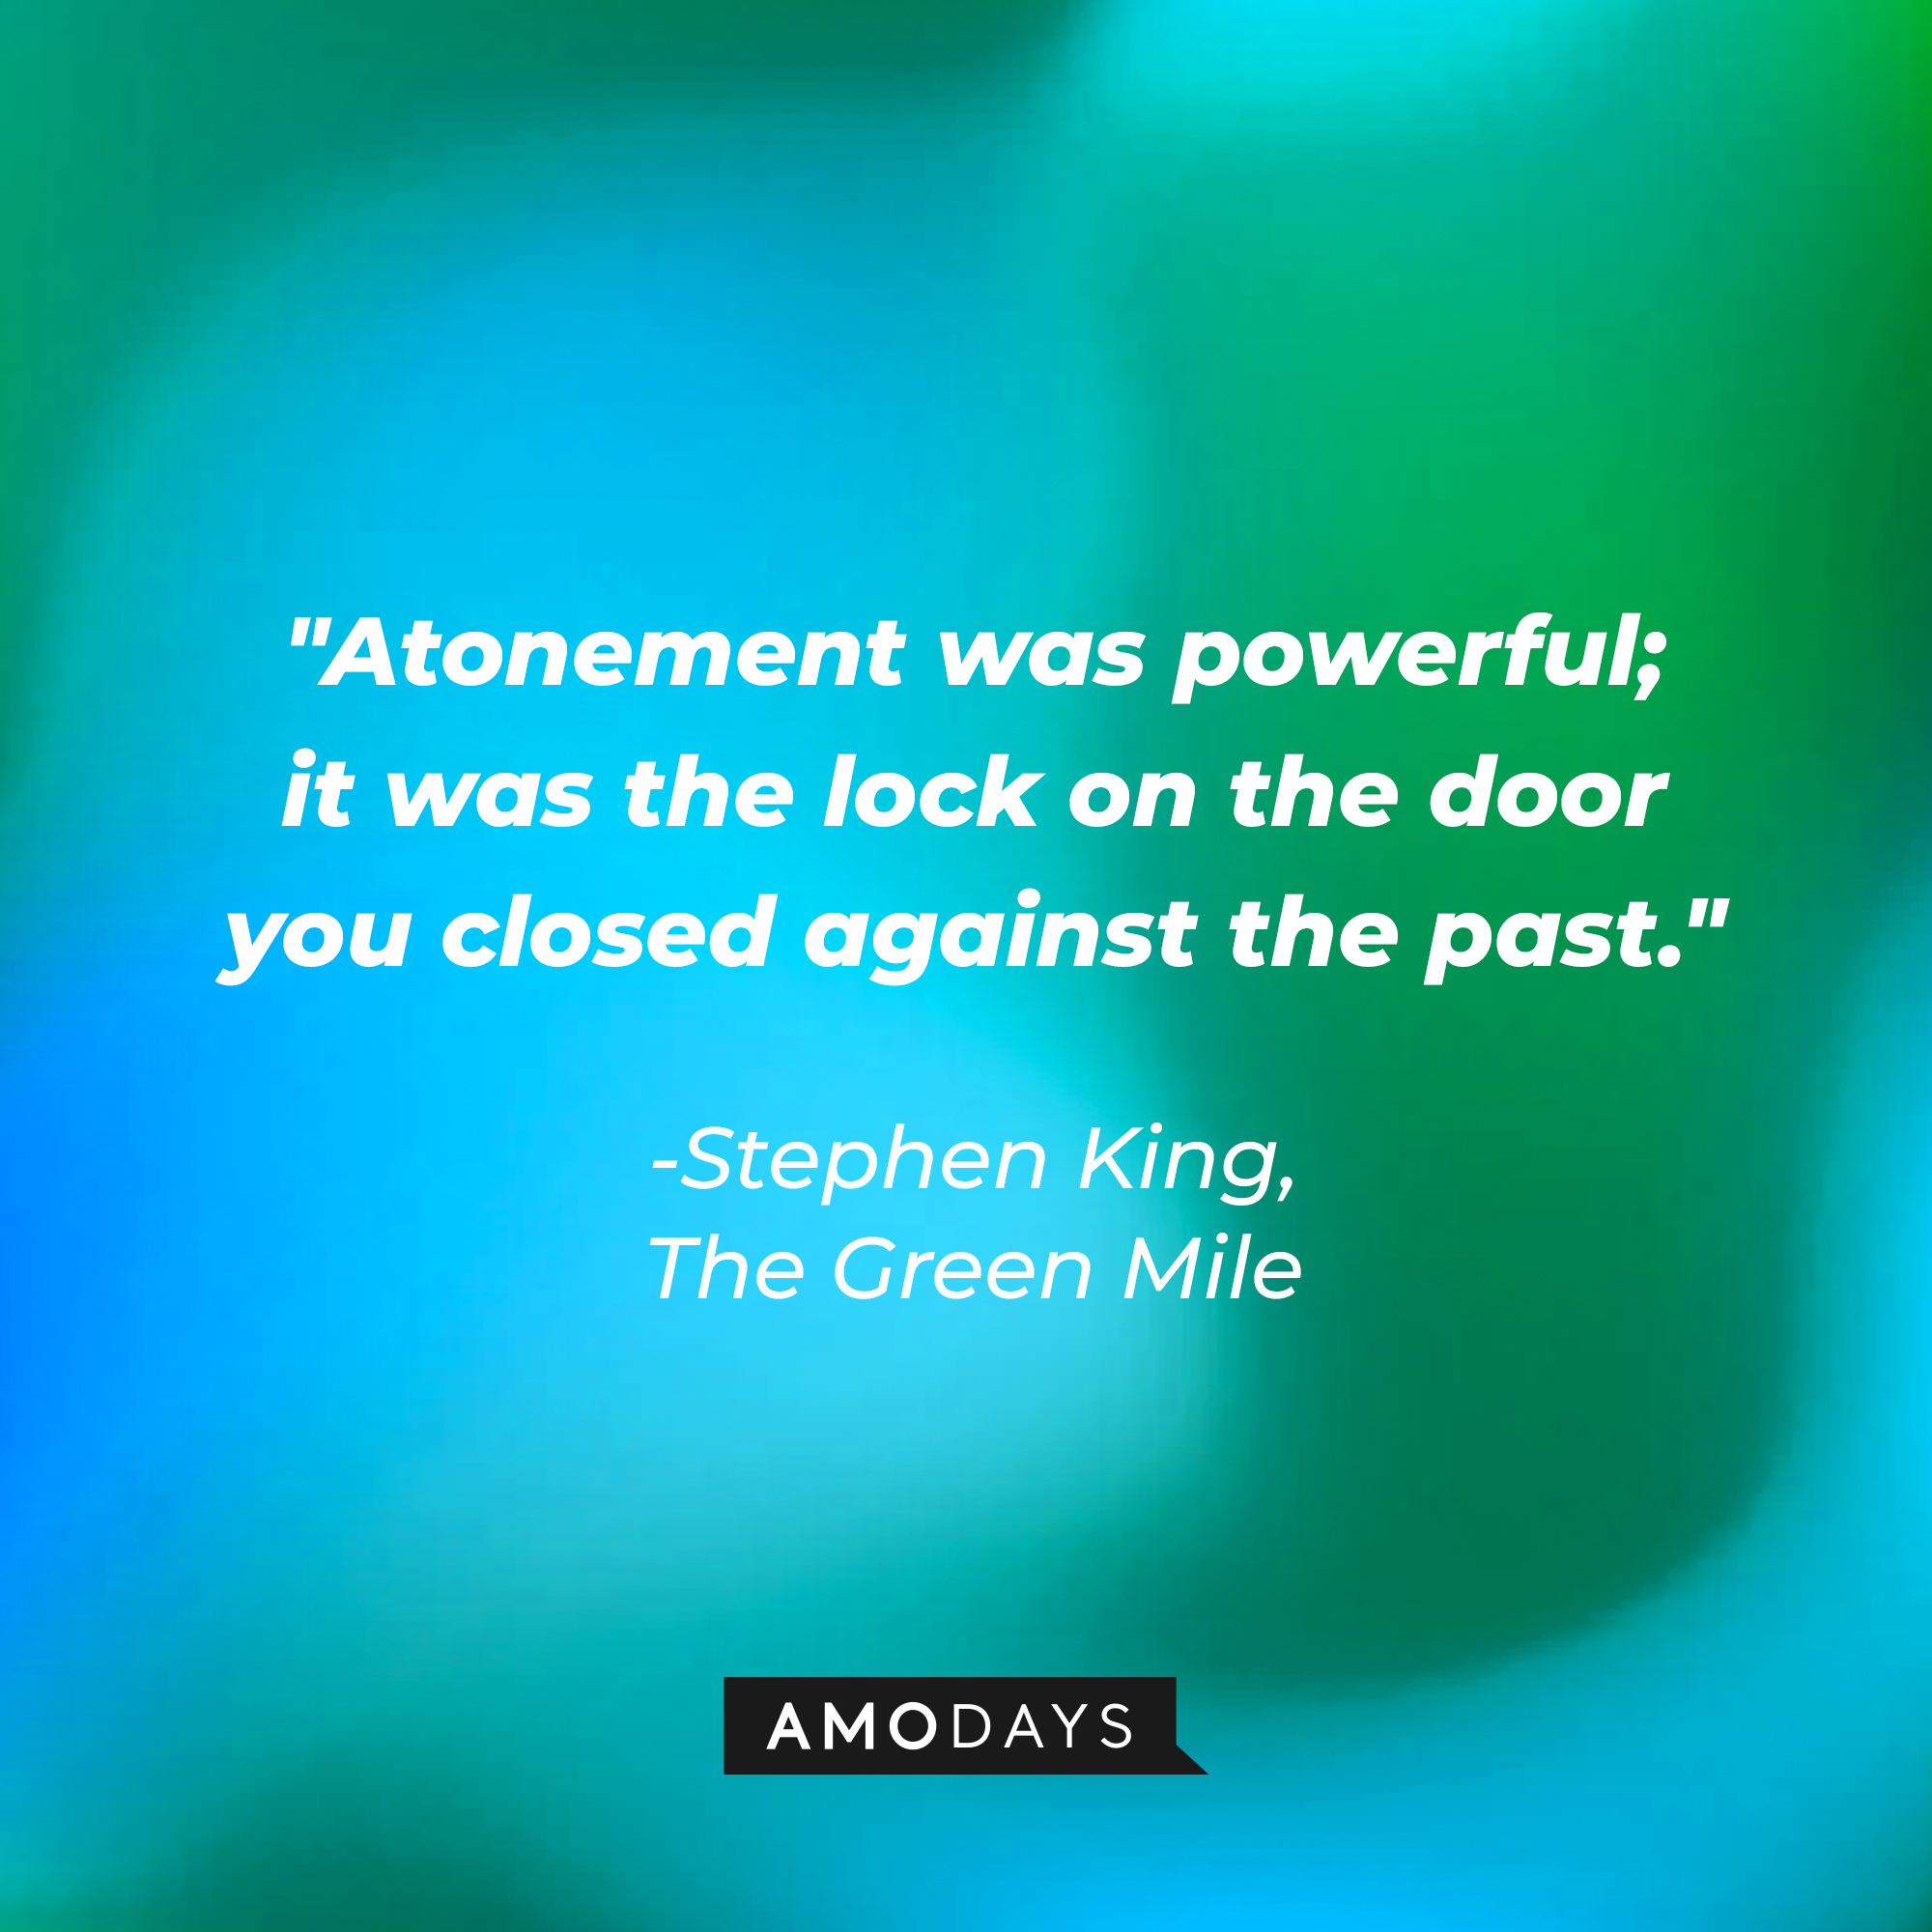 A photo with Stephen King's quote, "Atonement was powerful; it was the lock on the door you closed against the past." | Source: Amodays